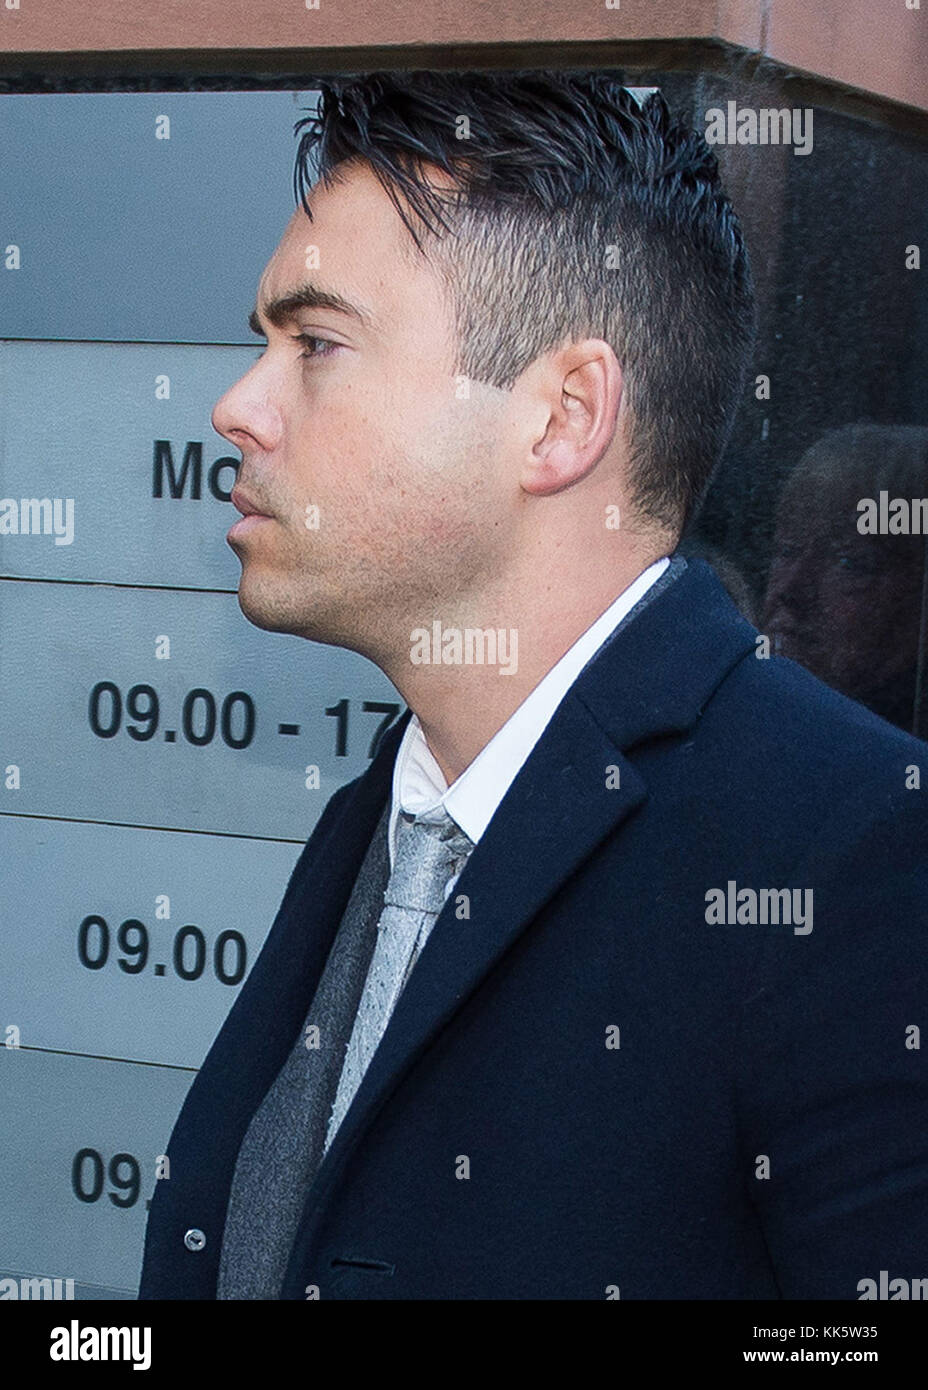 Coronation Street actor Bruno Langley arrives at Manchester Magistrates' Court charged with sexually assaulting two women at a Manchester music venue. Stock Photo